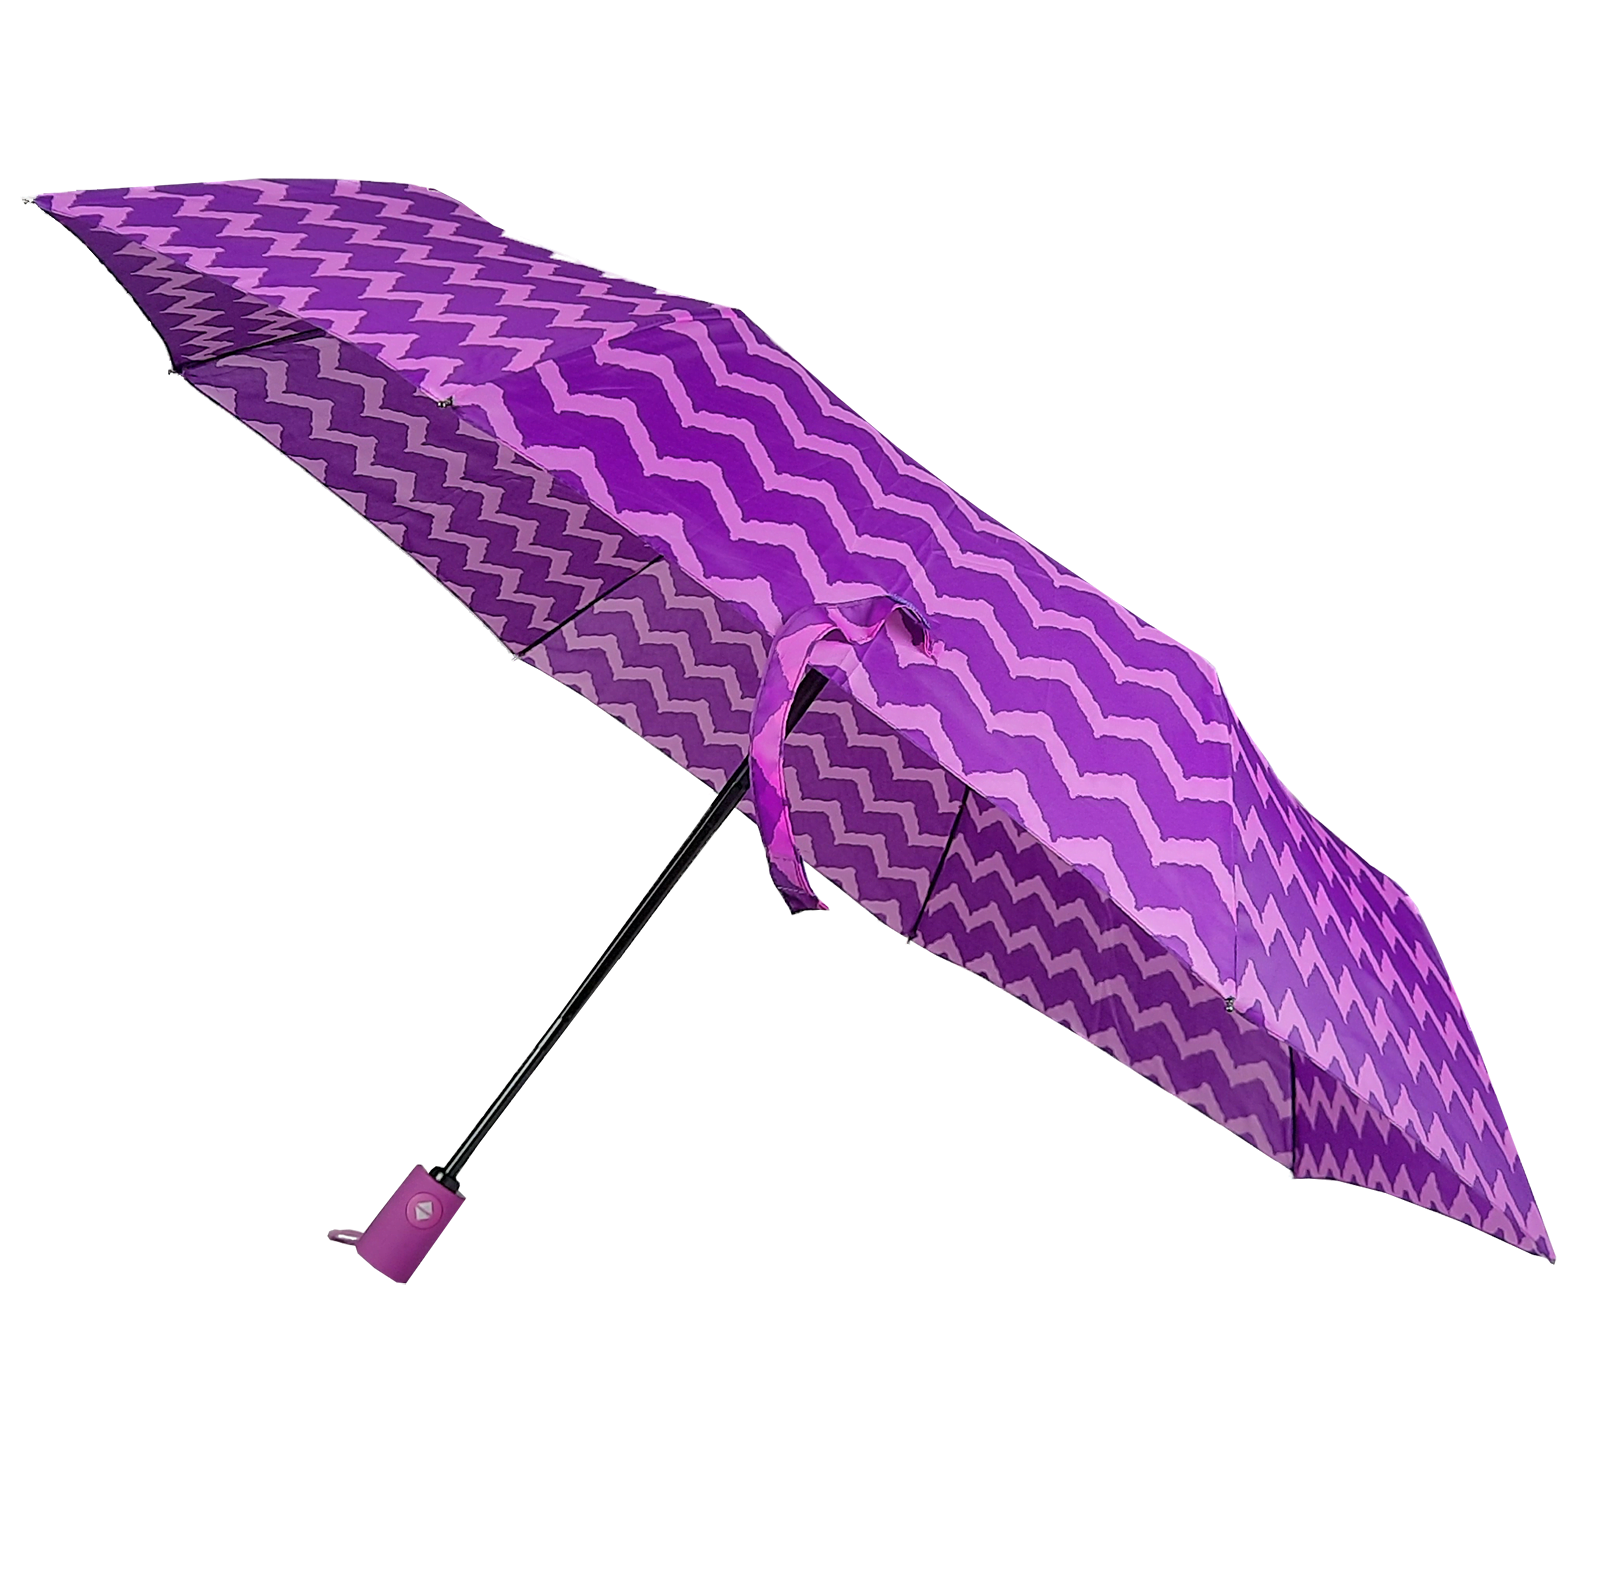 Purple automatic compact umbrella on special offer!